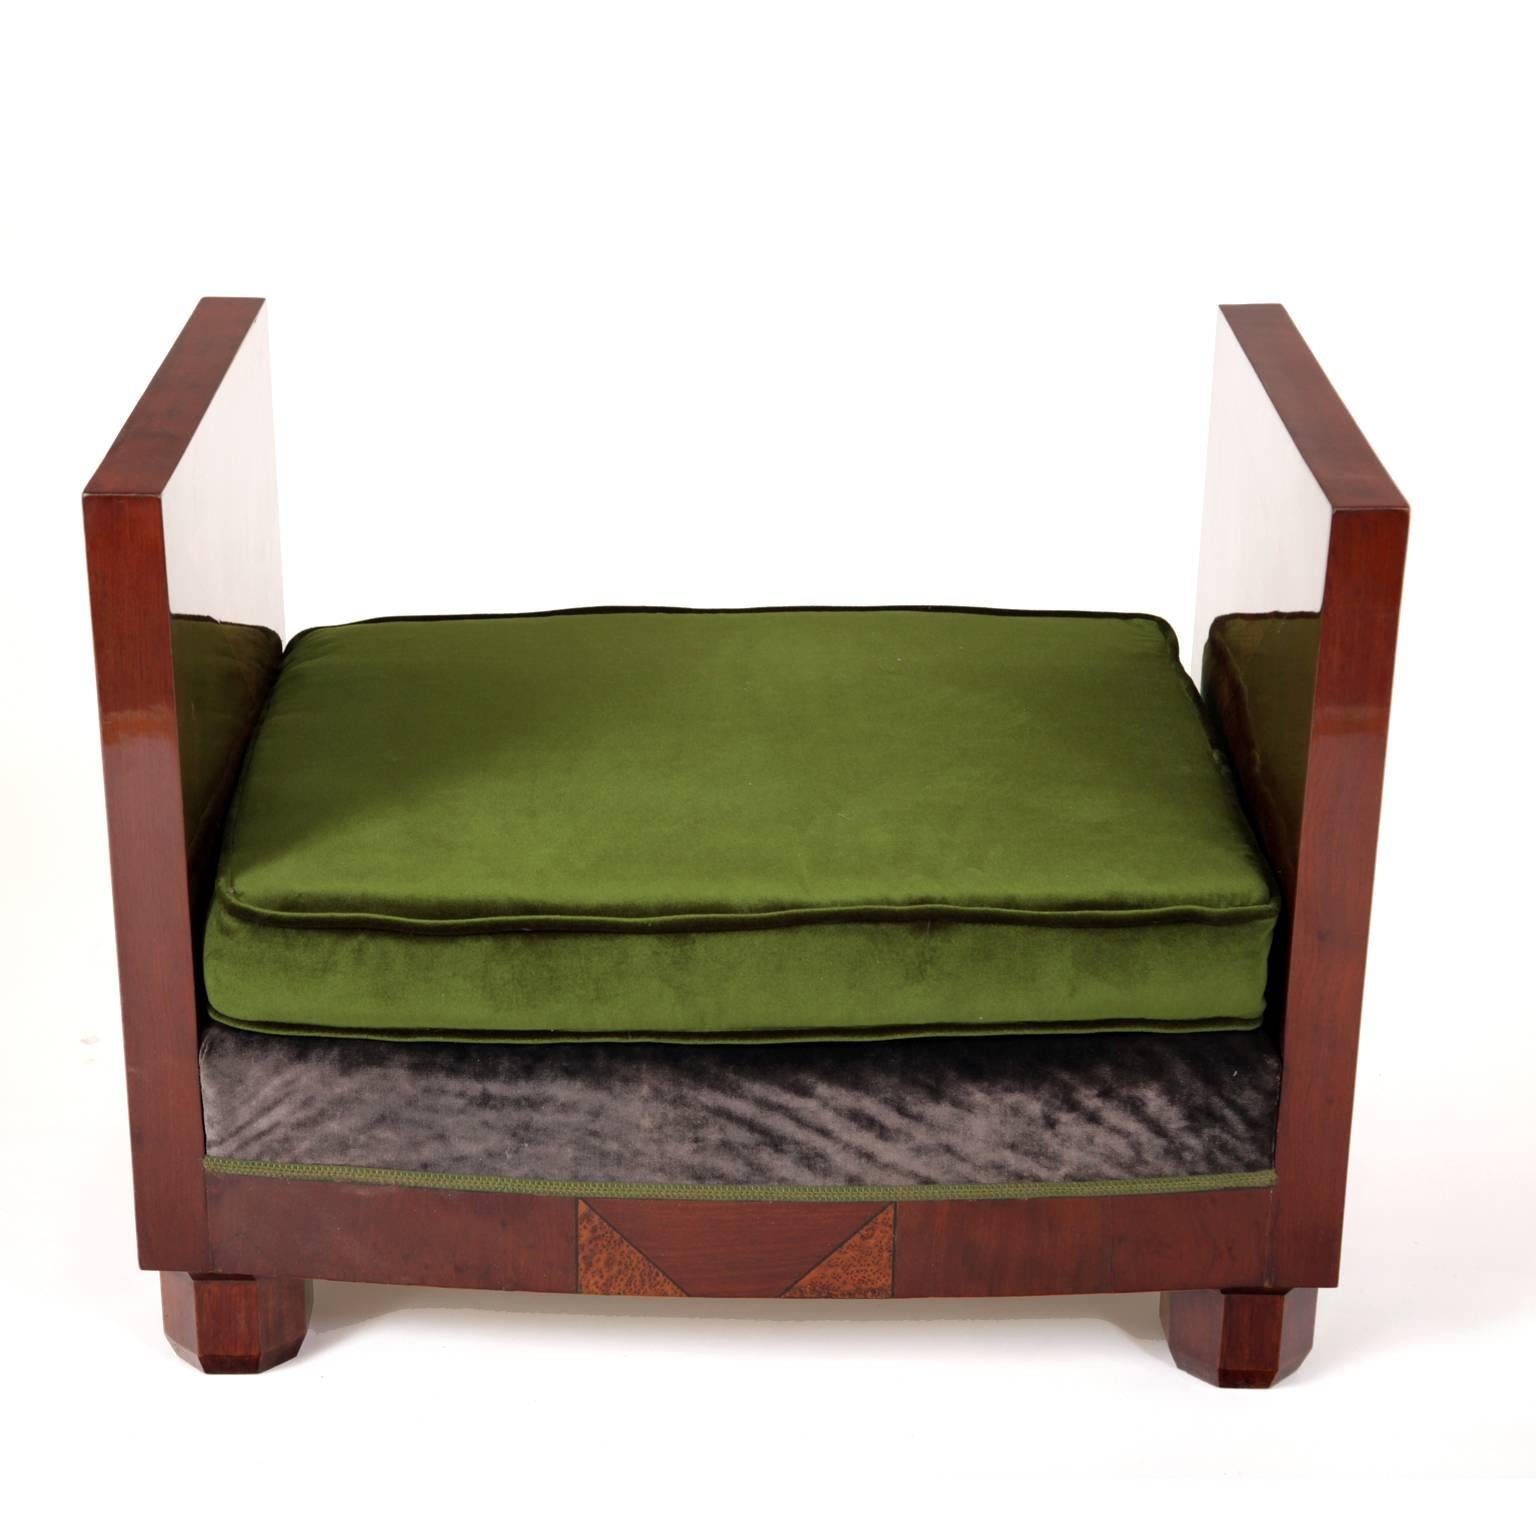 Small Art Deco bench on octagonal feet with green velvet upholstery and geometrical inlays on armrests and skirt.